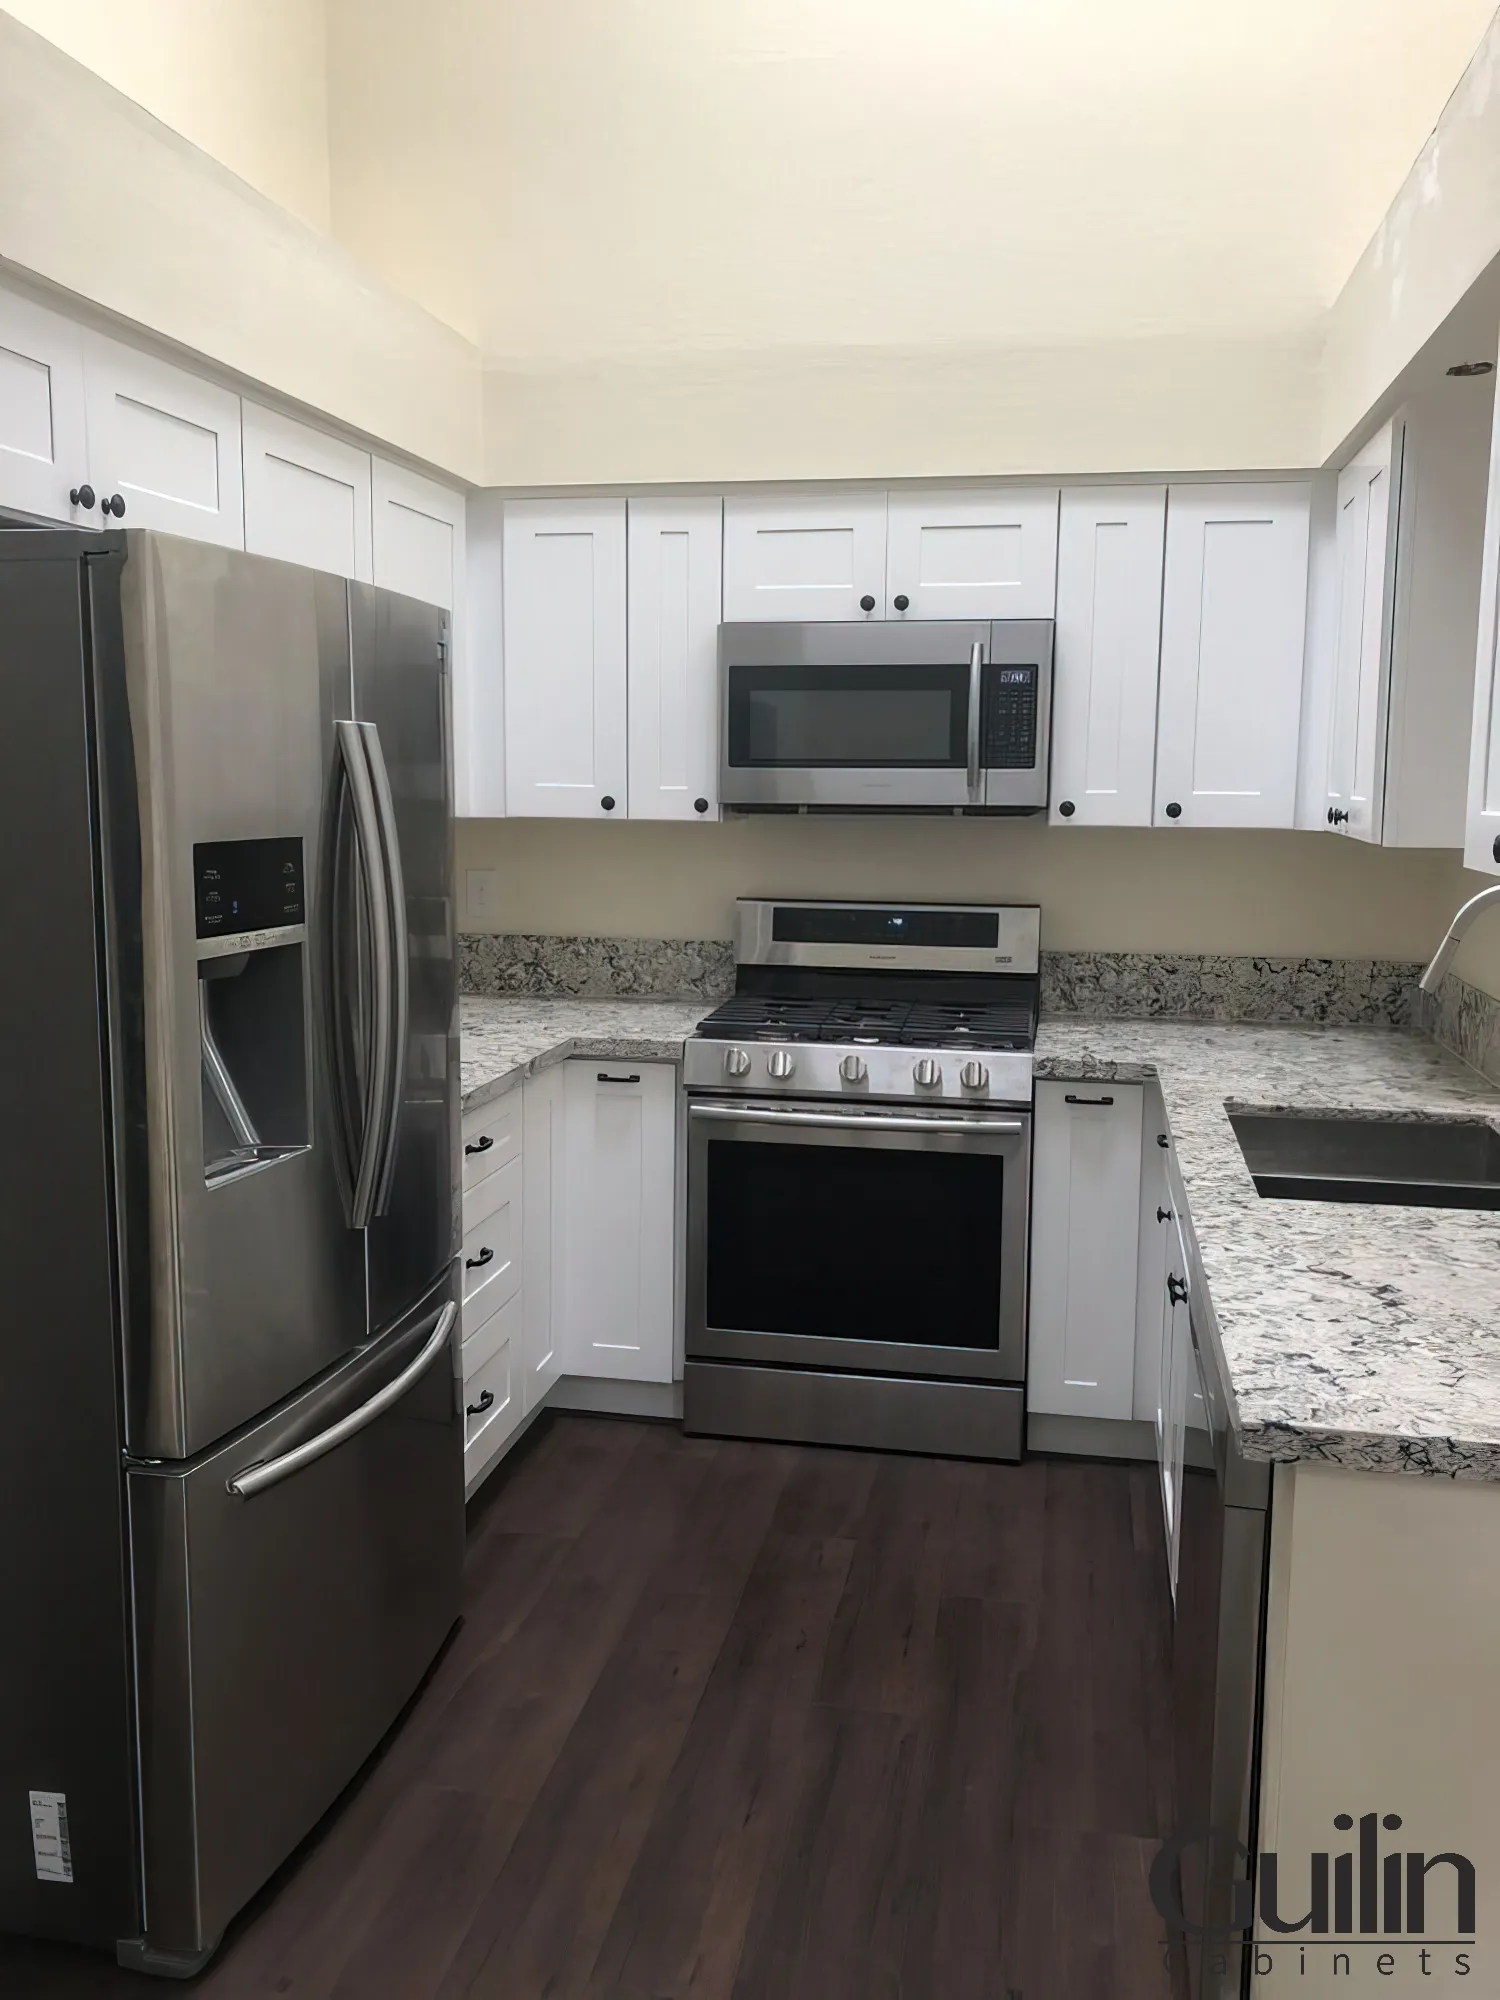 After Whole Kitchen Remodel into the Newone by Guilin Cabinets Huntington Beach CA 3 gigapixel low res scale